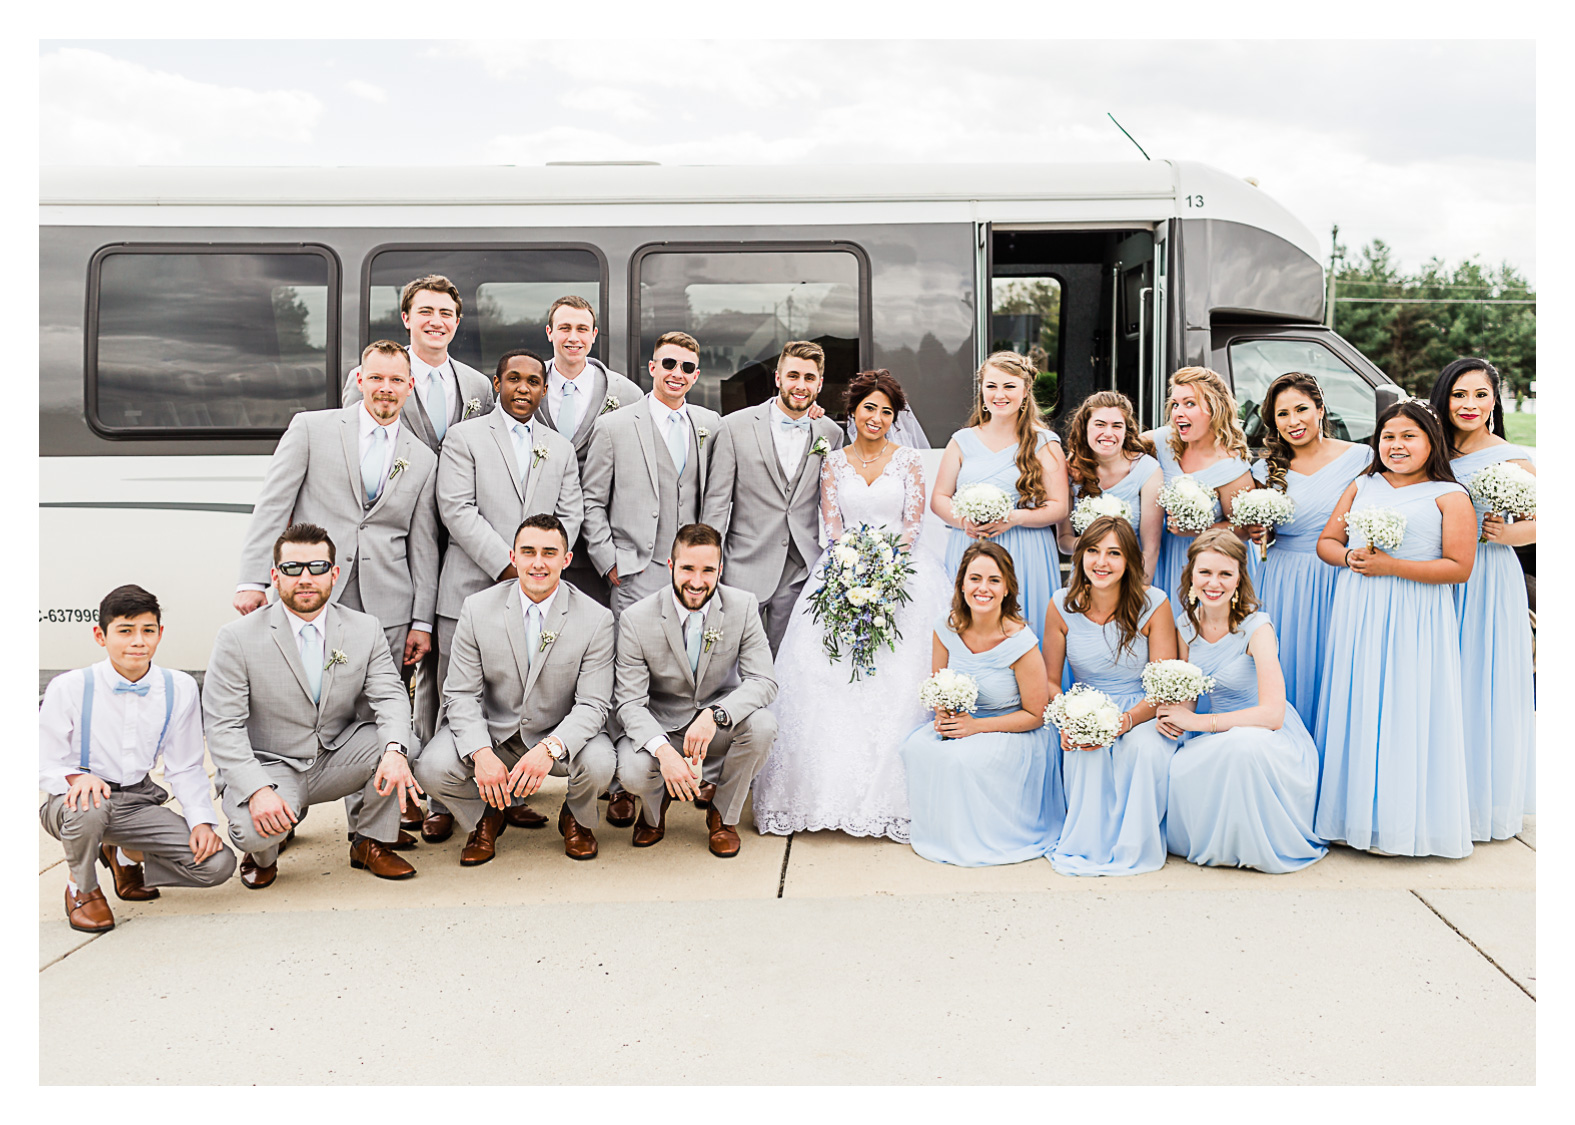 manassas-virginia-wedding-bridal-party-in-front-of-party-bus-blue-dresses.jpg